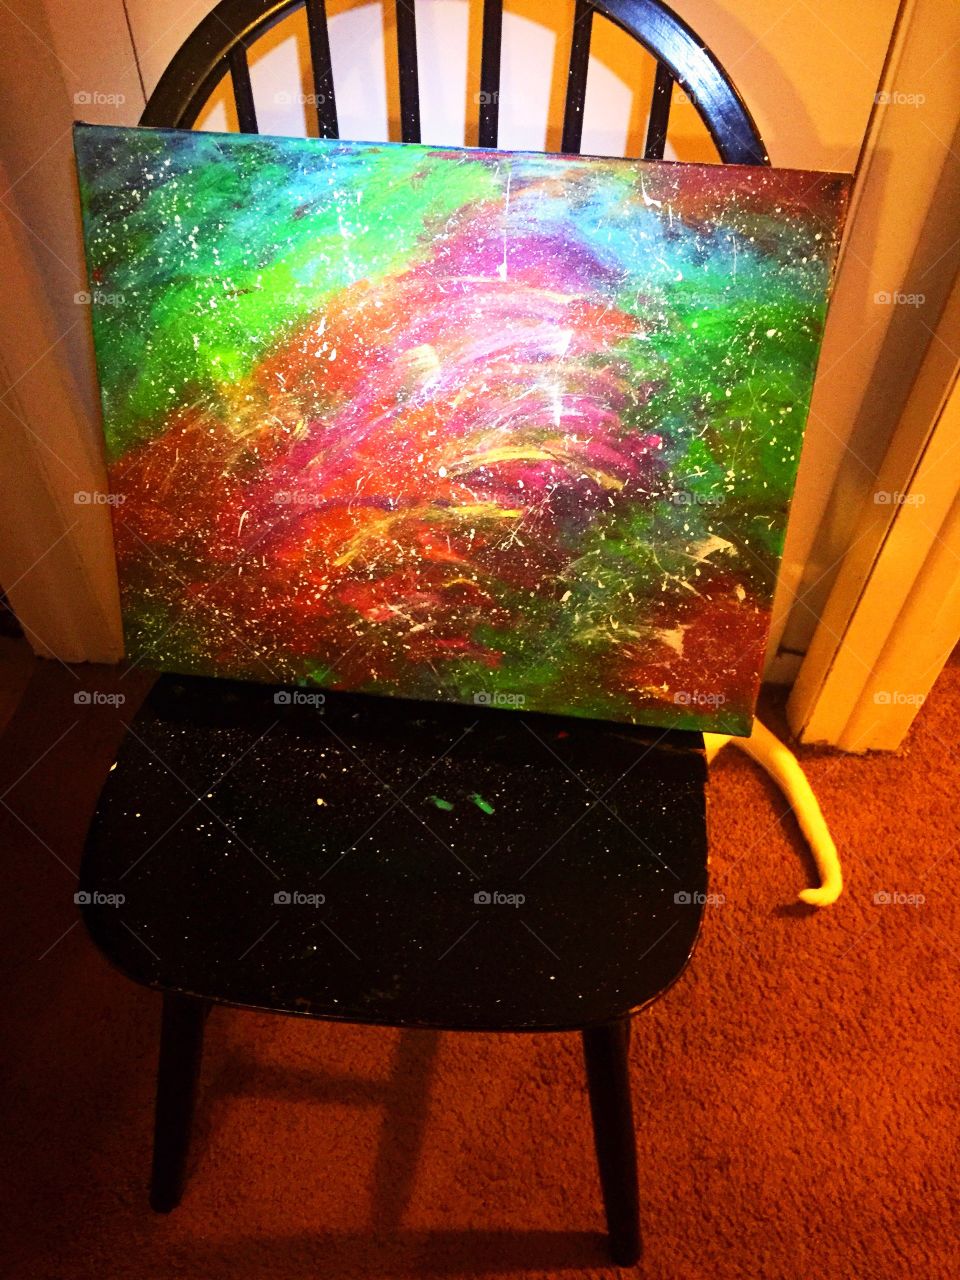 Galaxy painting I finished today!